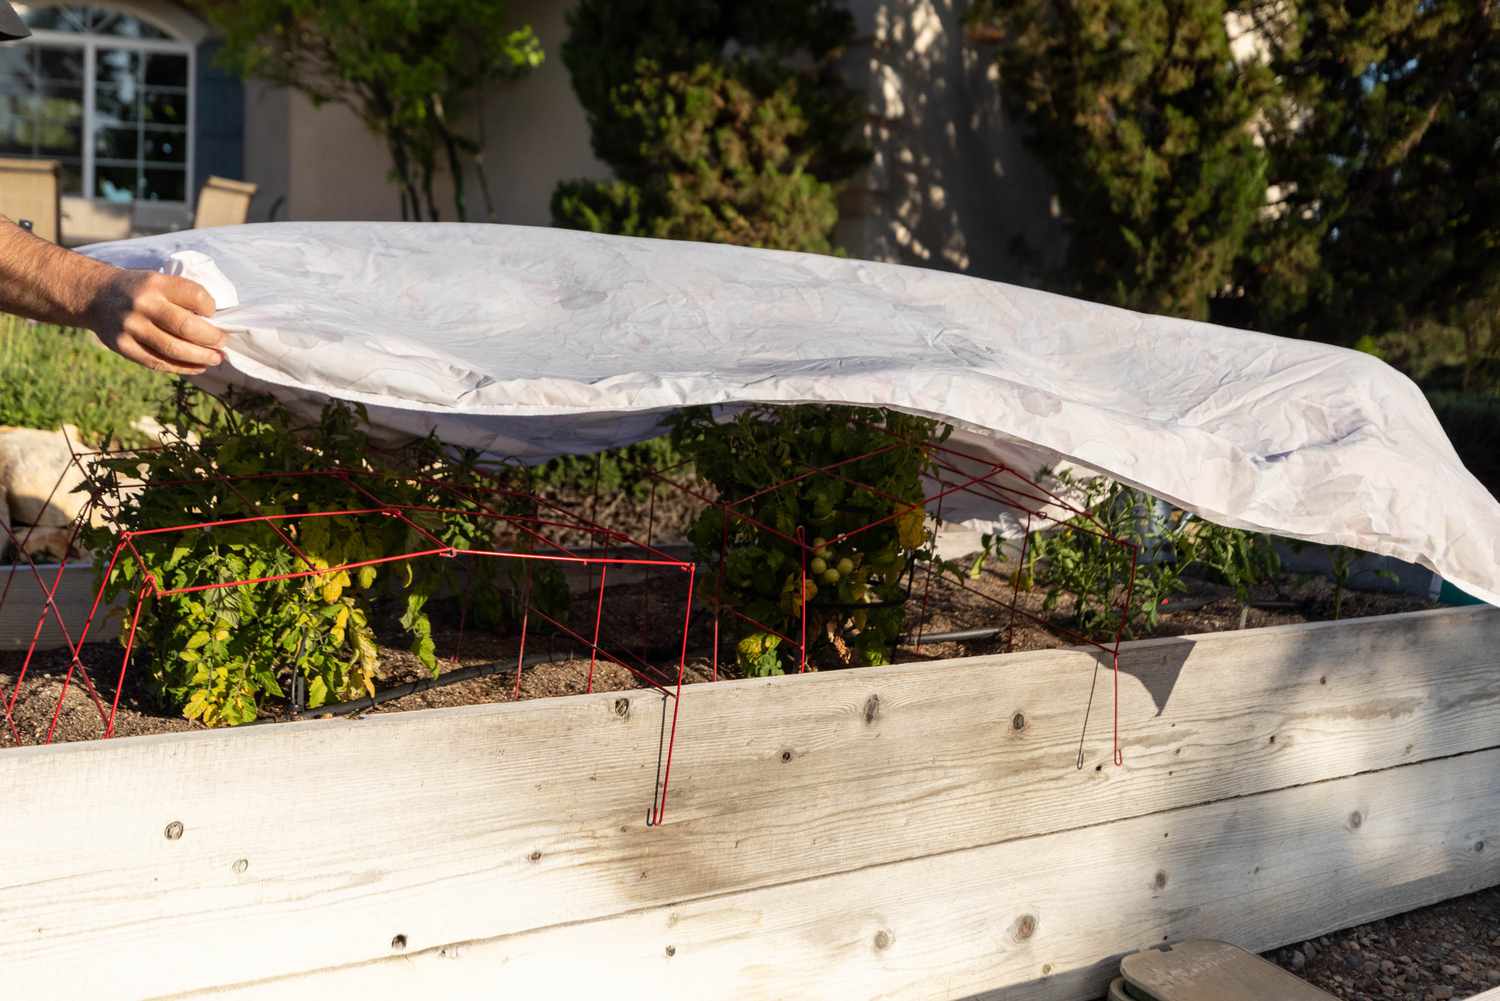 White sheet placed over tomato plants in raised garden bed